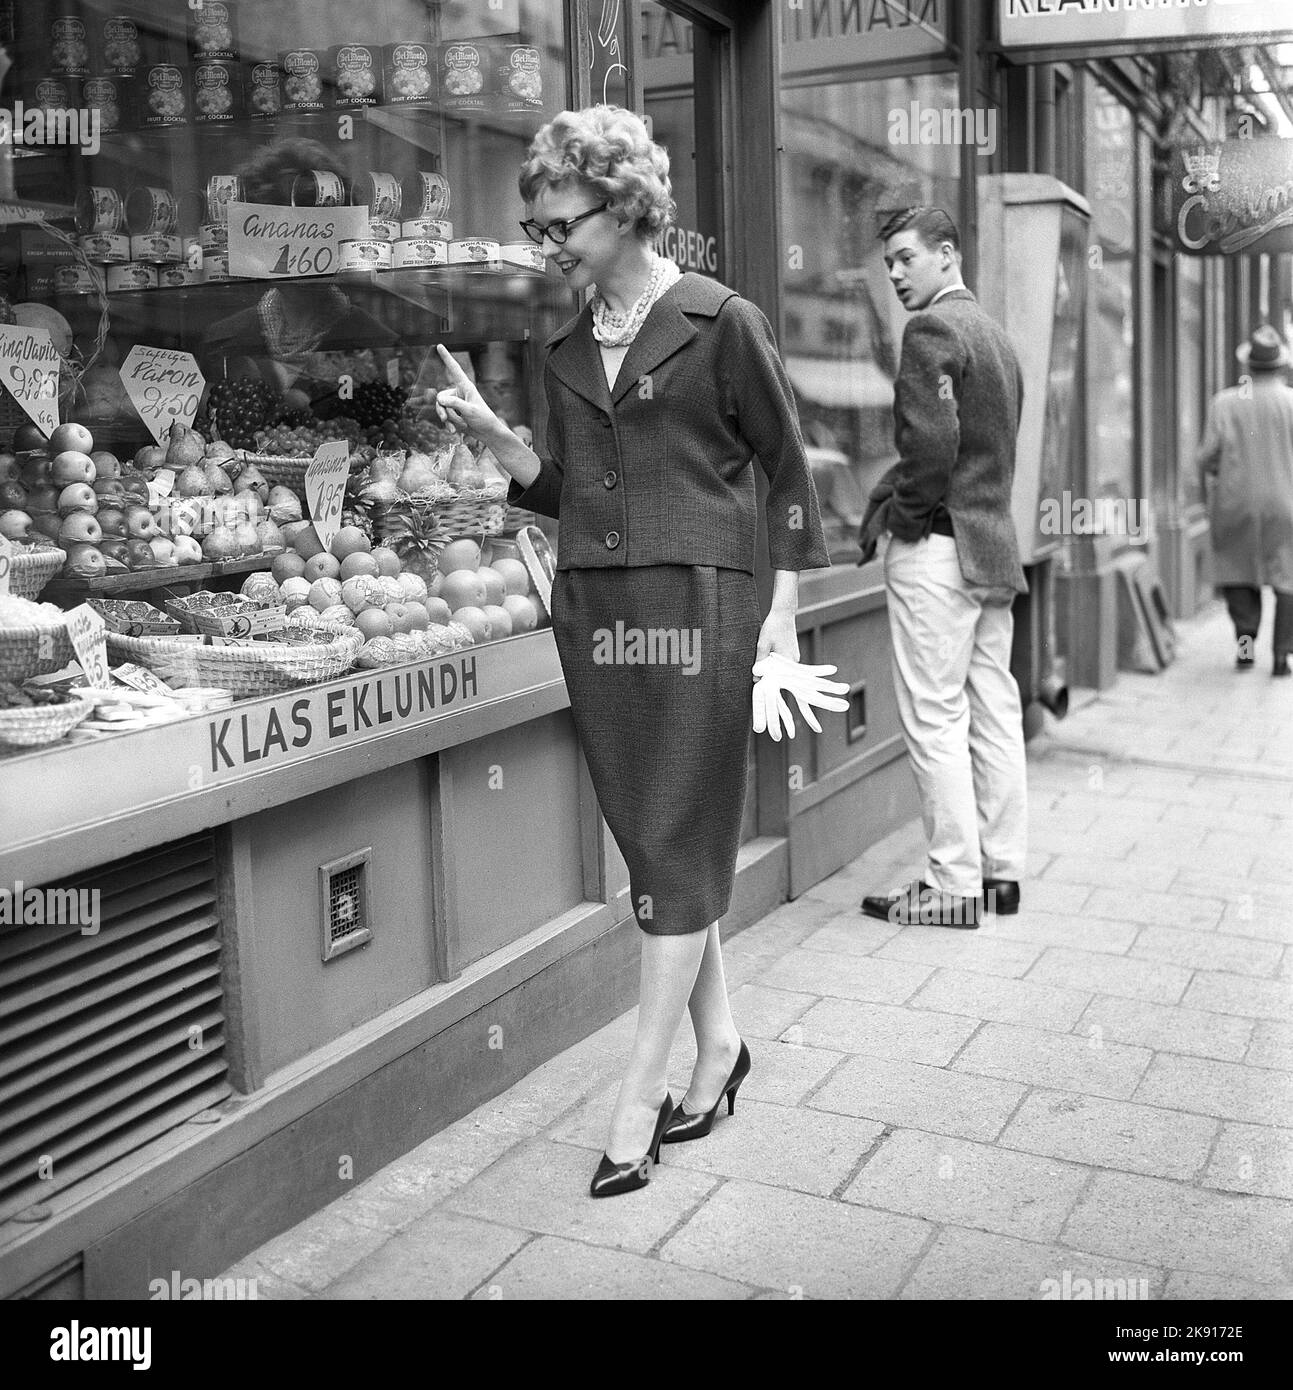 In the 1950s. A woman is pictured in the street and at the storefront of a fruit and groceries store. She looks as if she is deciding what to buy. Dressed in a matching jacket and skirt.  Sweden 1959 Kristoffersson ref CF58-4 Stock Photo